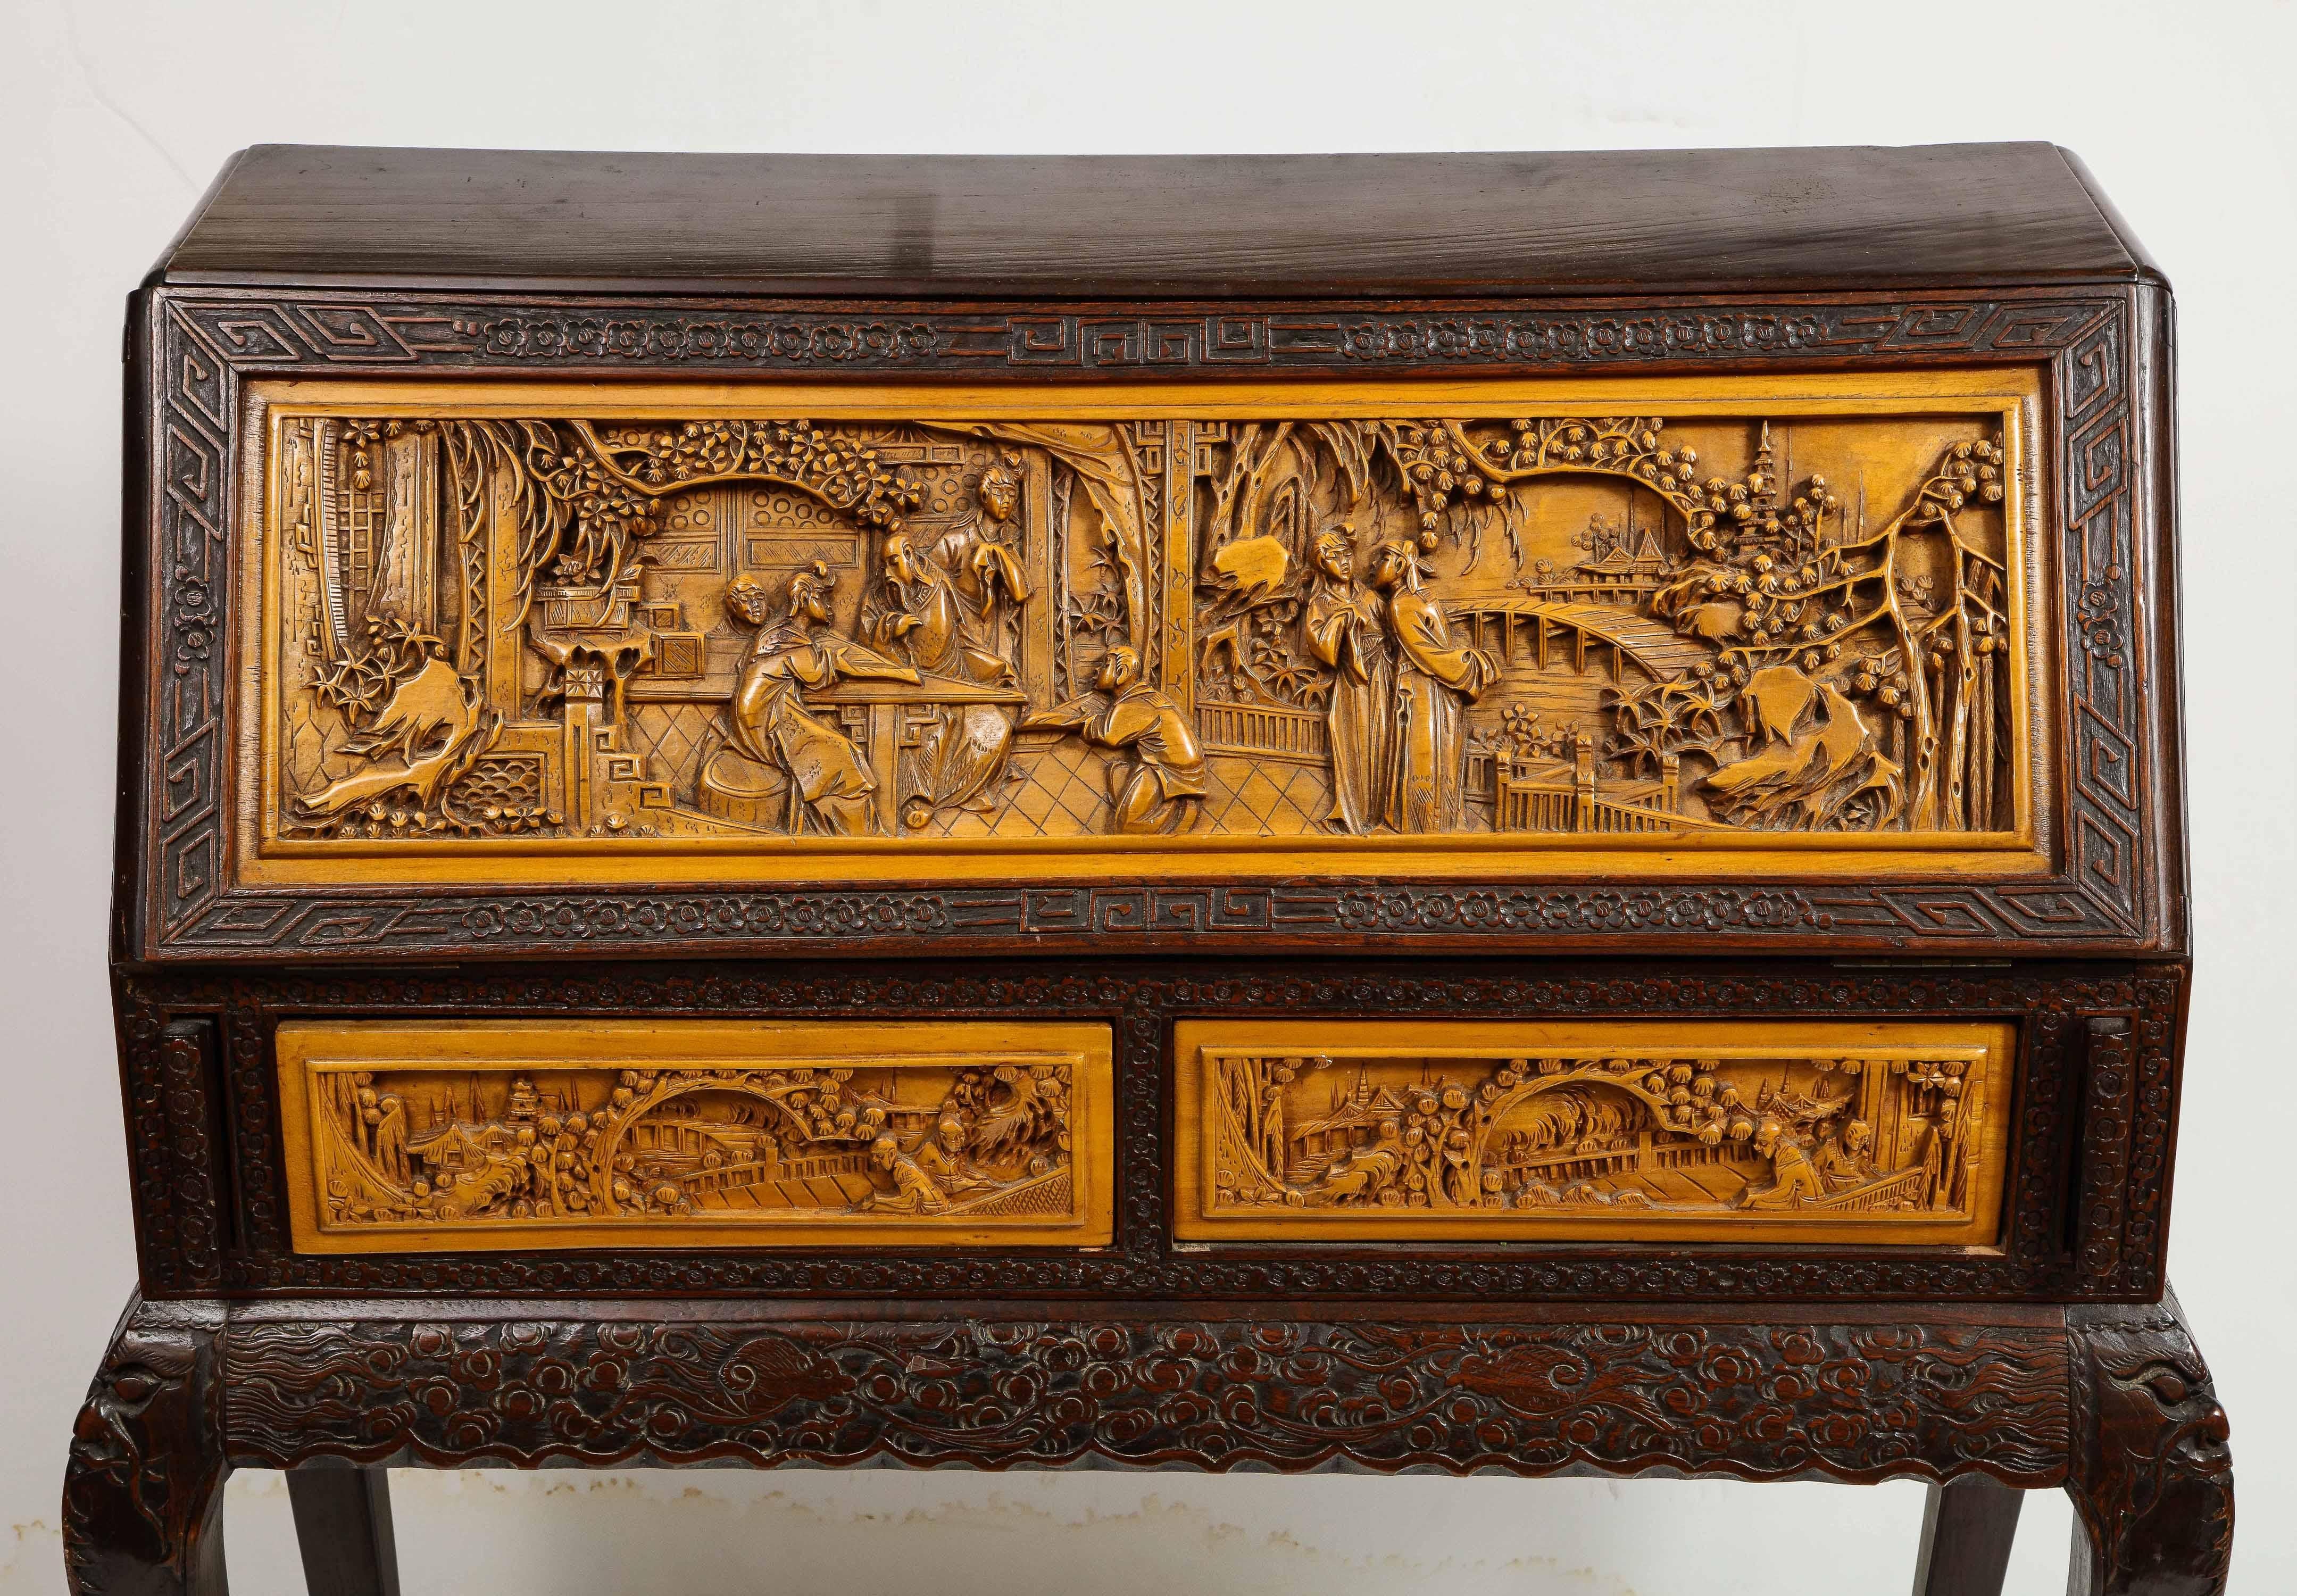 20th Century Chinese Export Carved Figural Hard Wood Desk Cabinet, circa 1900s